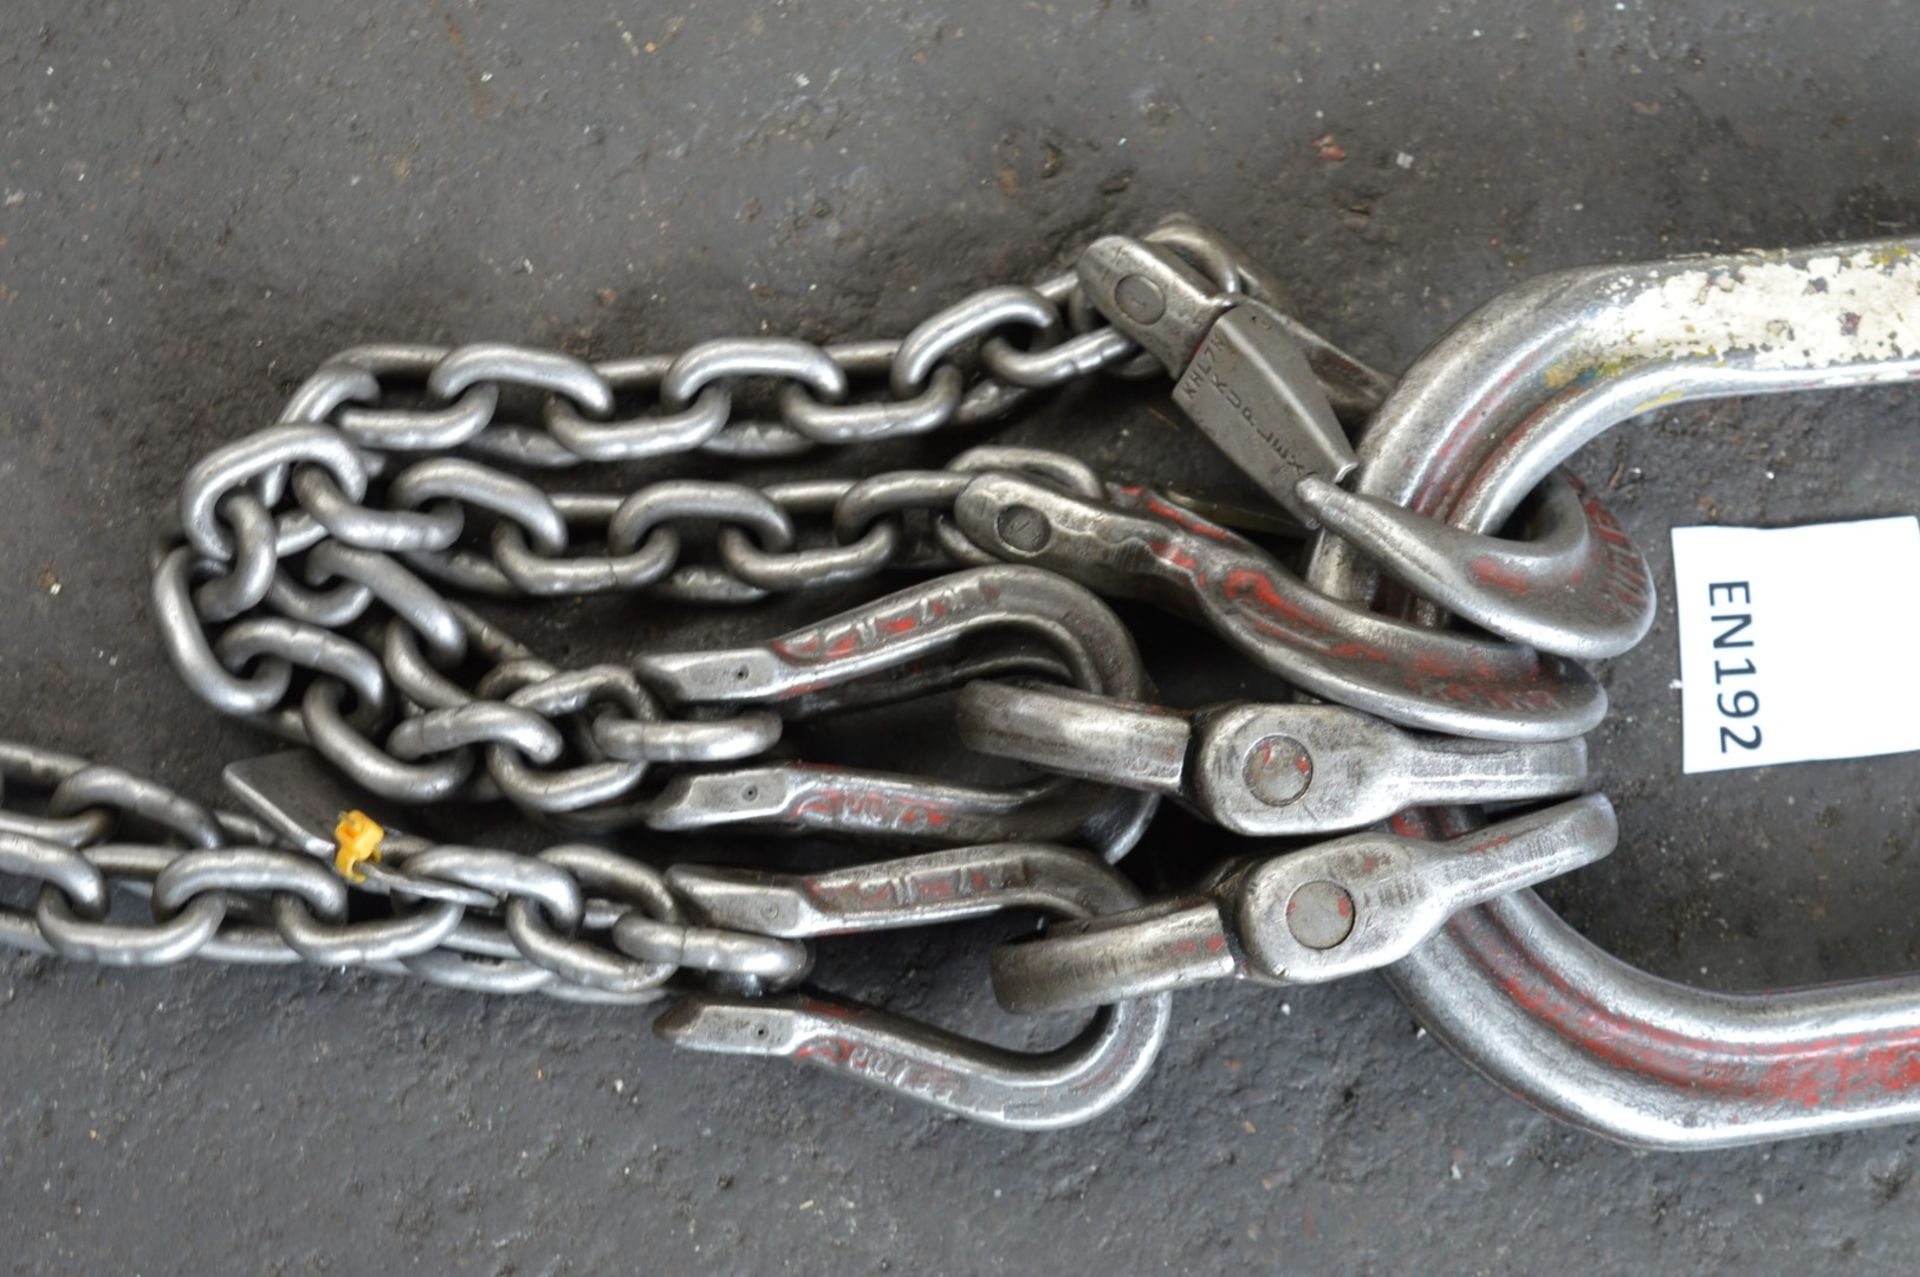 1 x Kuplex Lifting Chain With Various Sling Eye Hooks - Heavy Duty Lifting Equipment - CL202 - Ref - Image 4 of 7